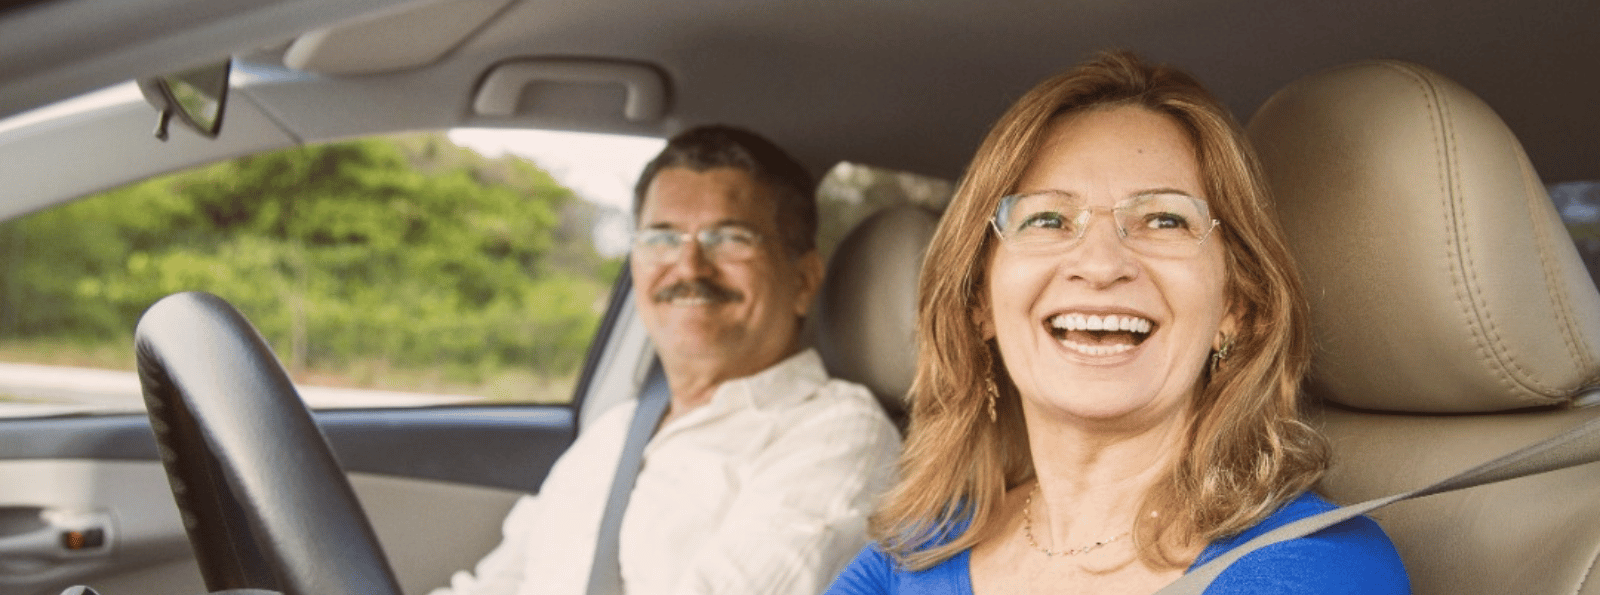 Couple sitting inside car and smiling